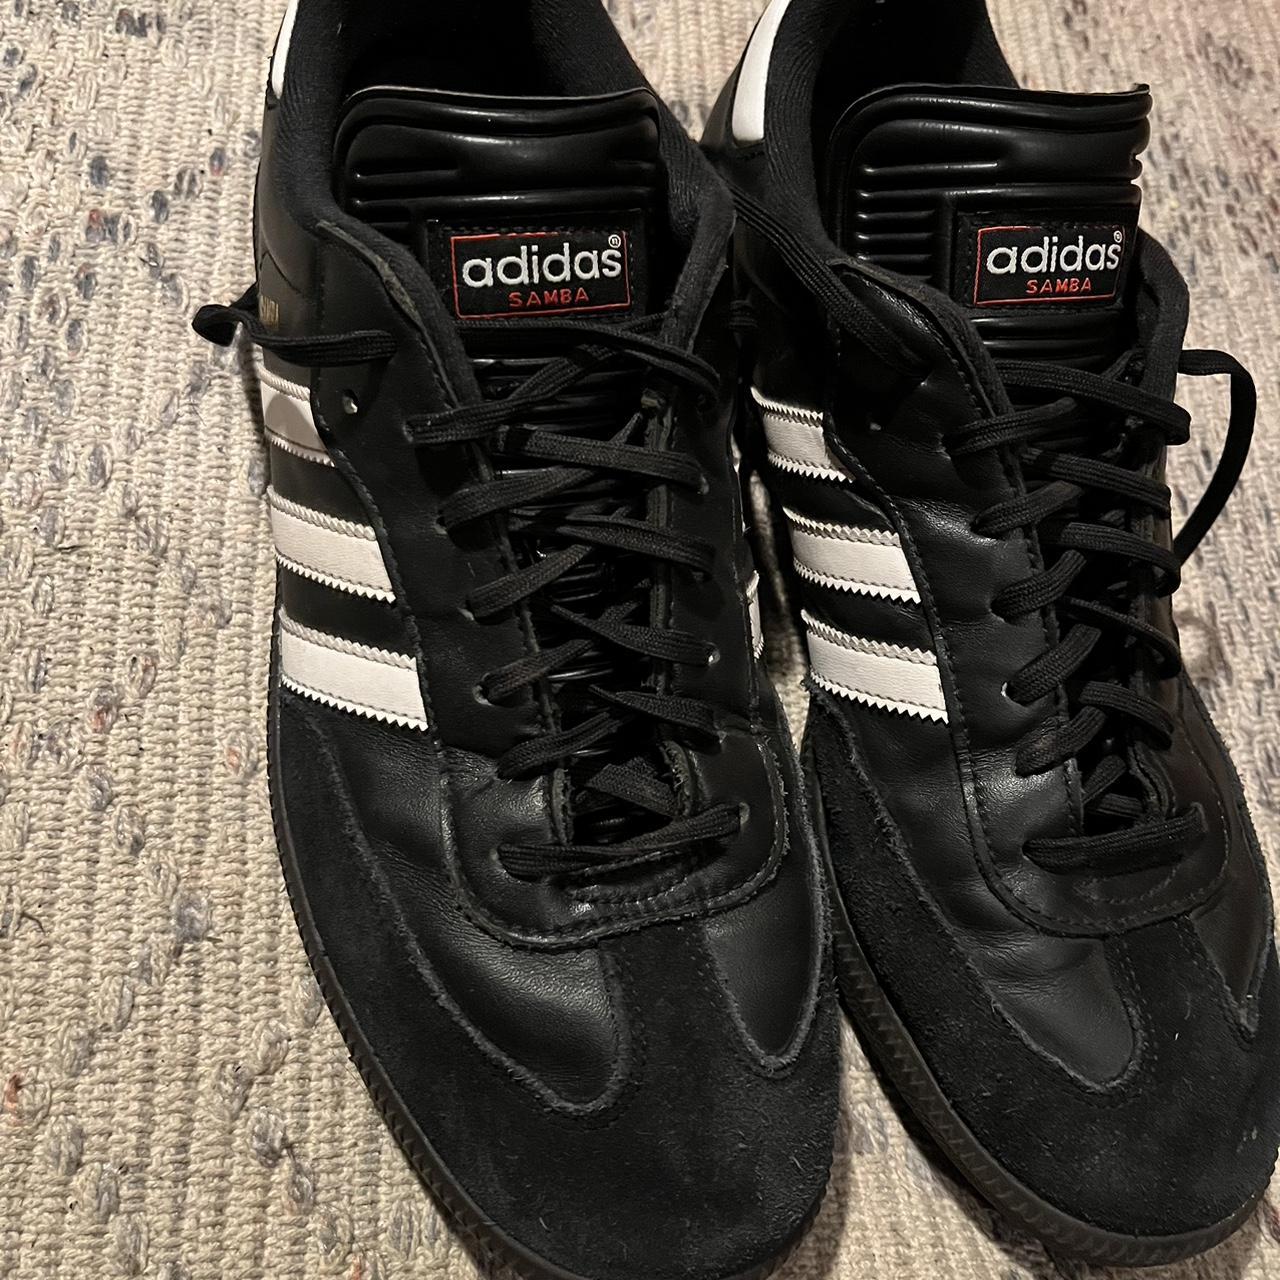 Adidas Men's Black and White Trainers (5)